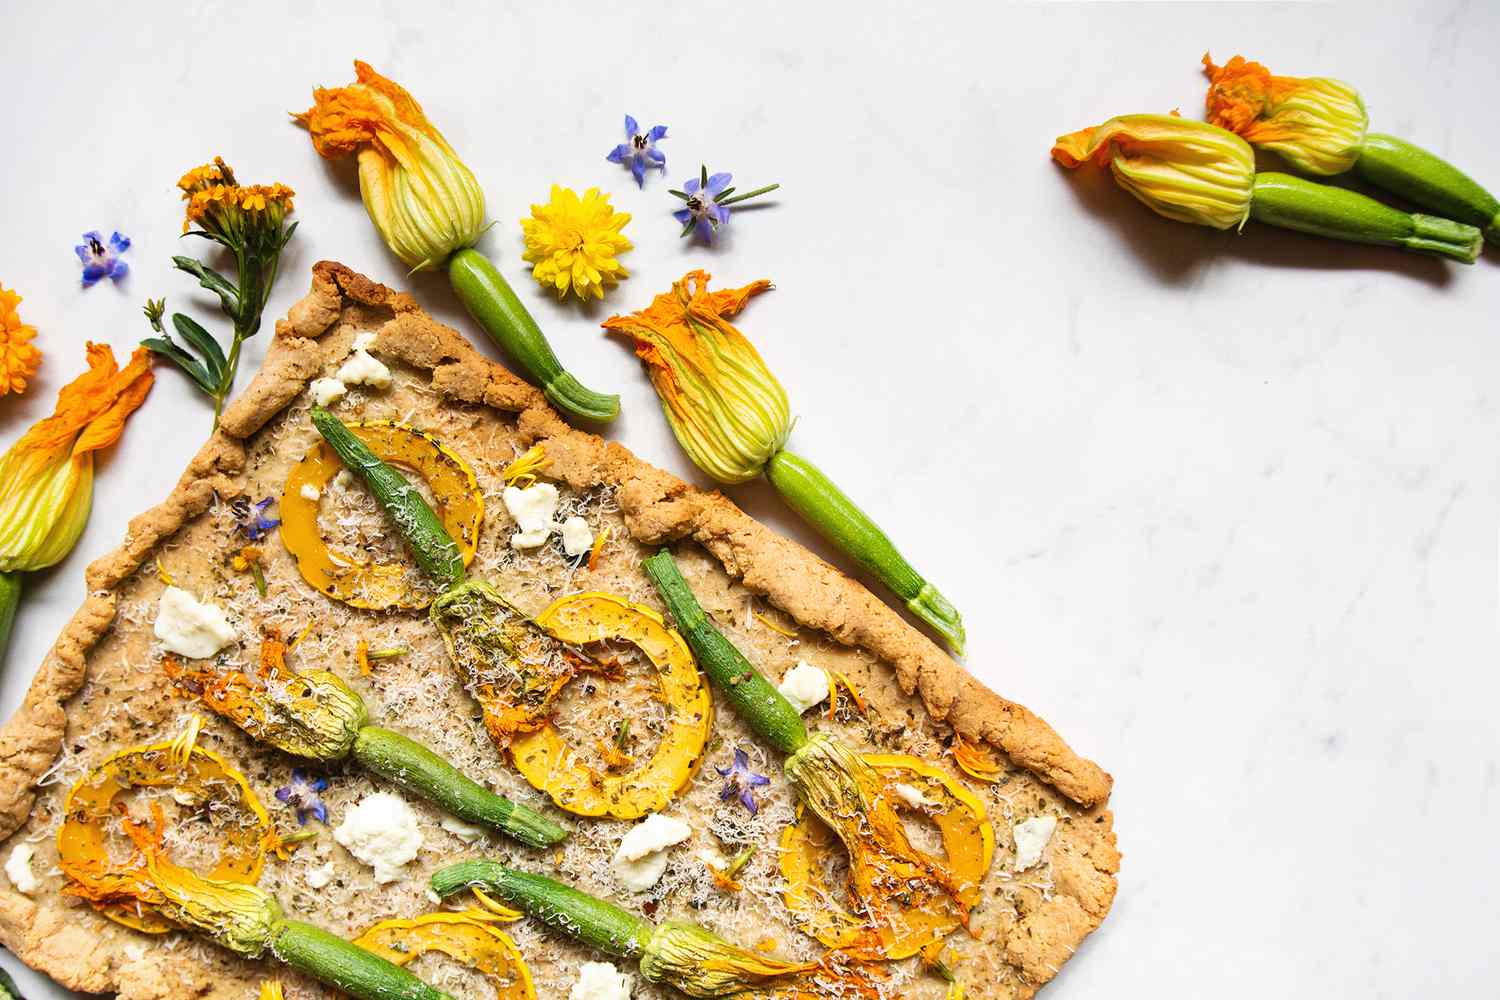 Using squash blossoms in baking